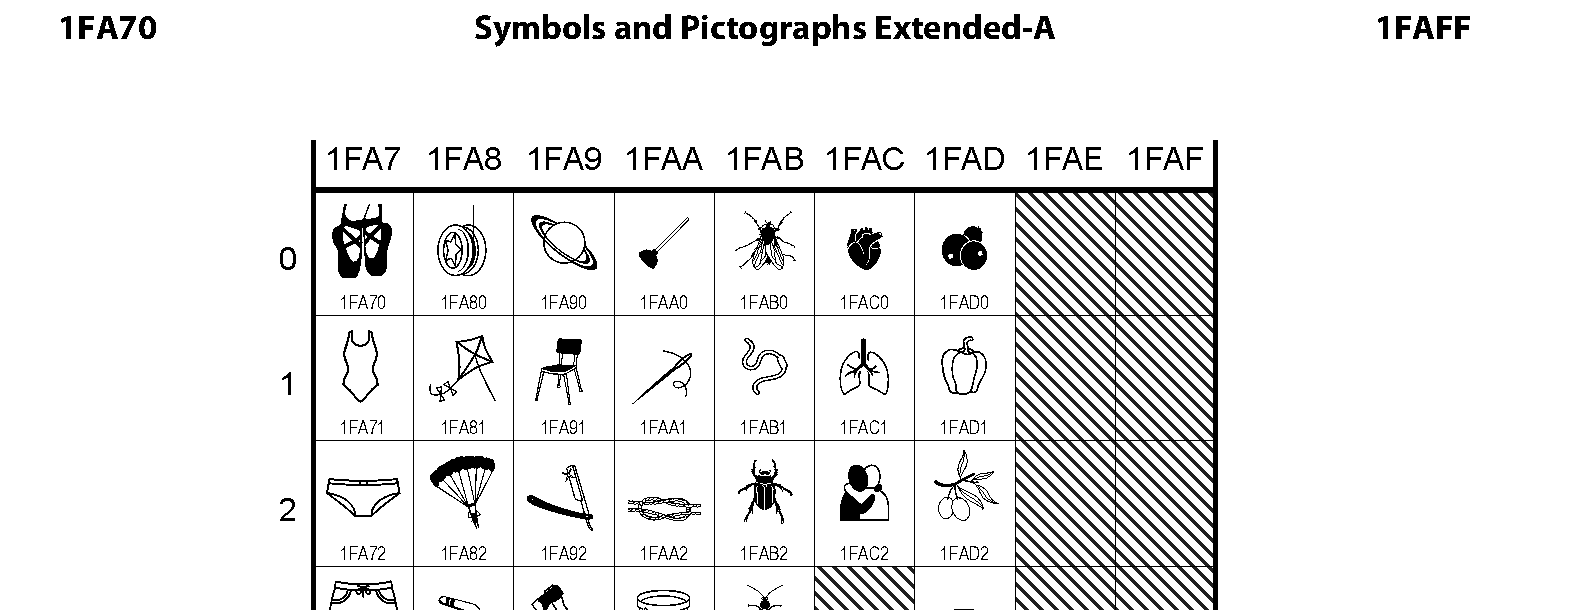 Unicode - Symbols and Pictographs Extended-A